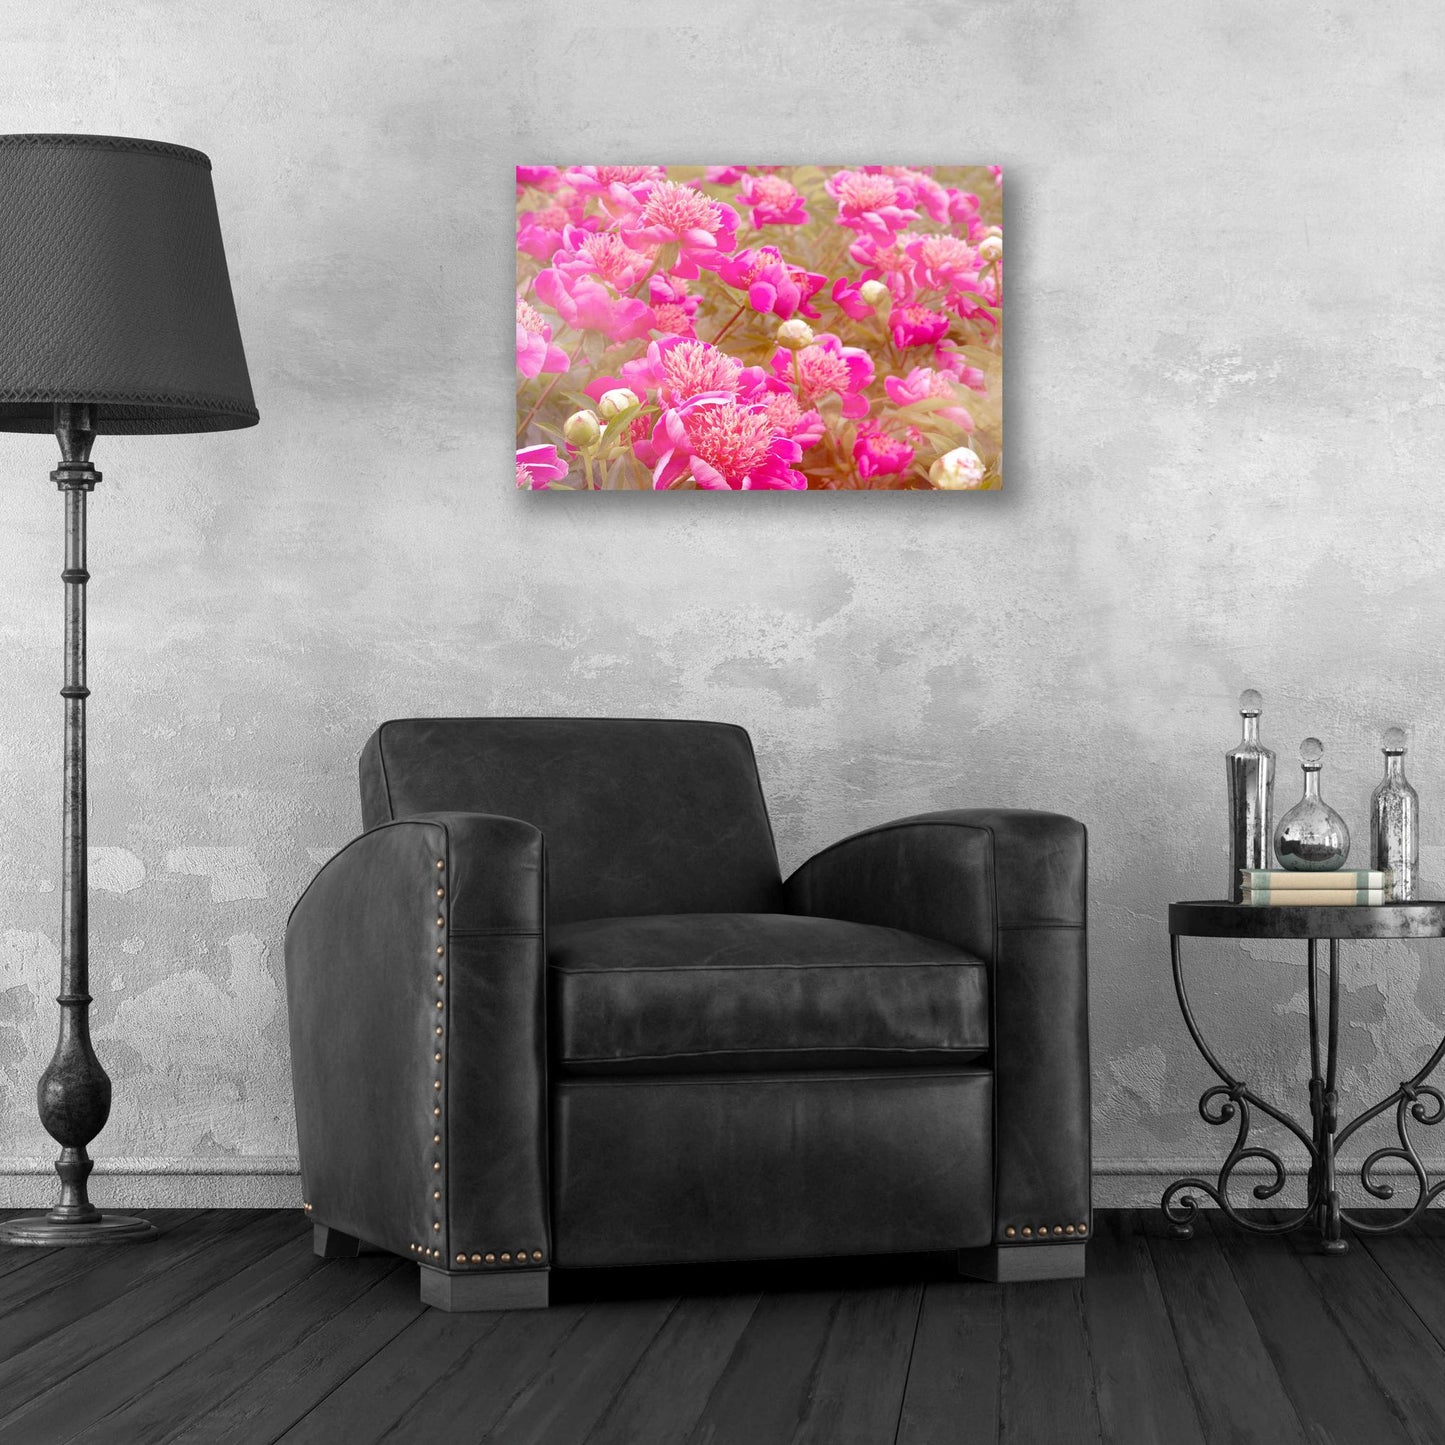 Epic Art 'Pinks' by Dennis Frates, Acrylic Glass Wall Art,24x16